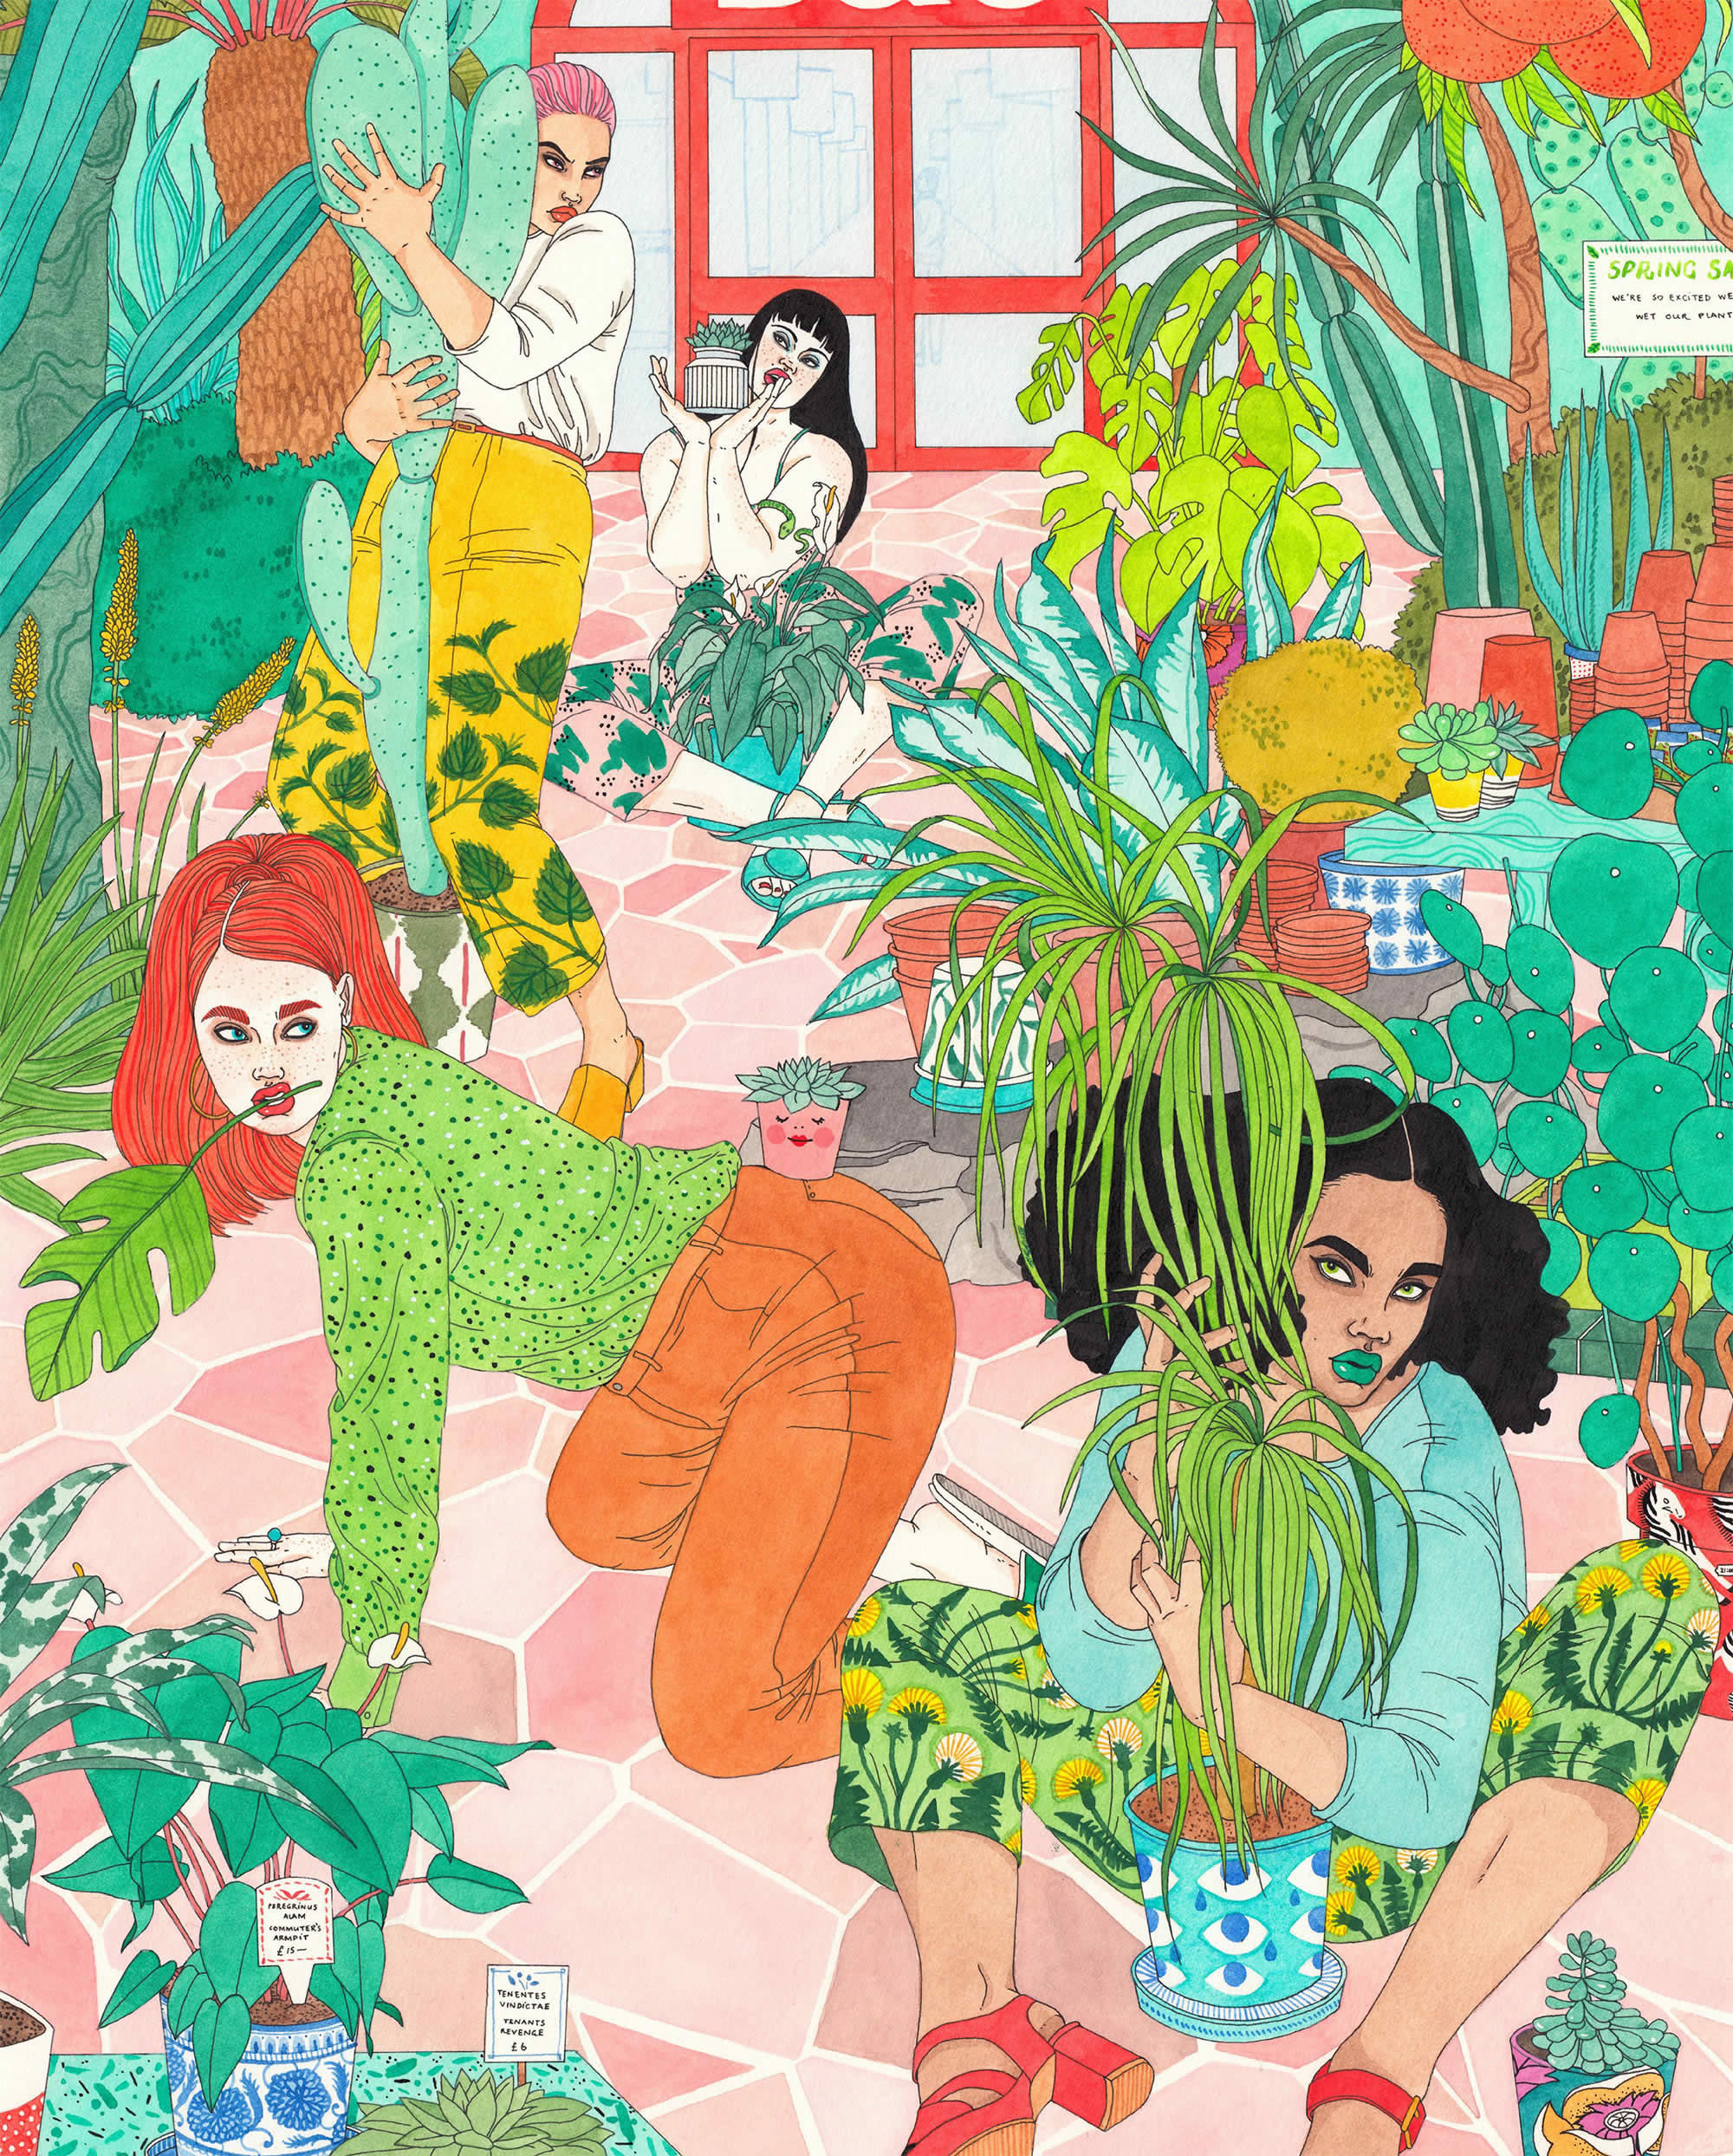 beachbody, women with flowers and posing, by Laura Callaghan